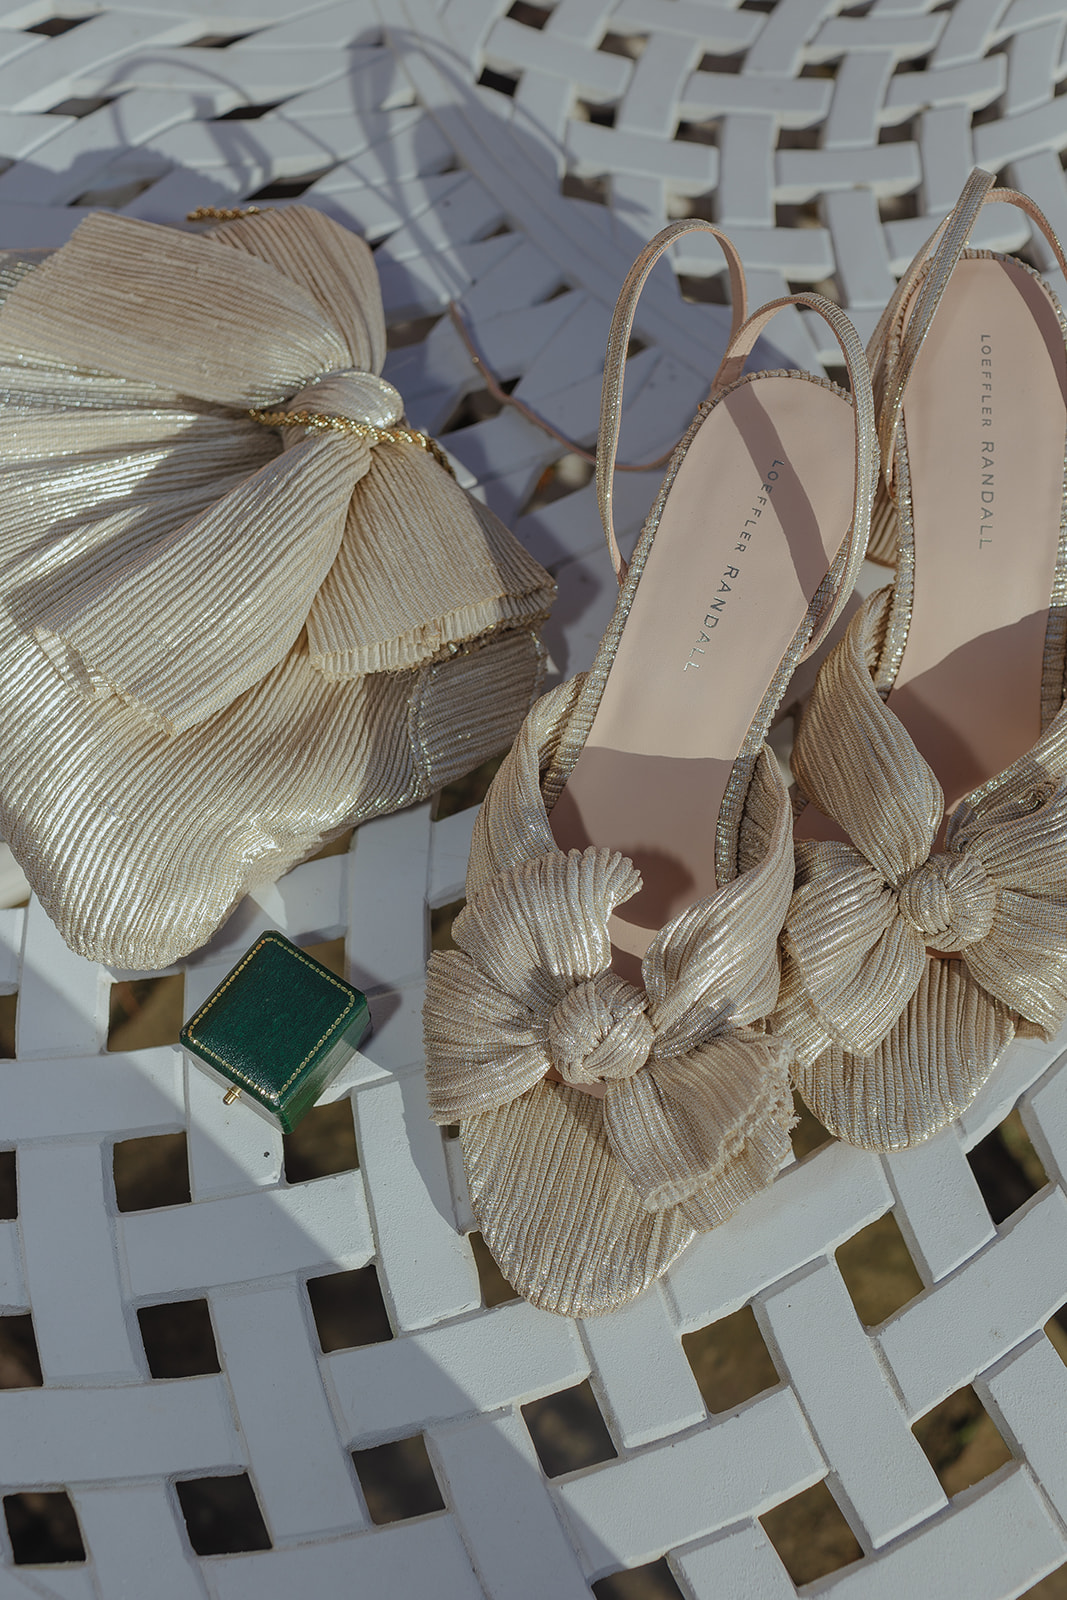 Frances quinn wedding shoes and bag in portmeirion